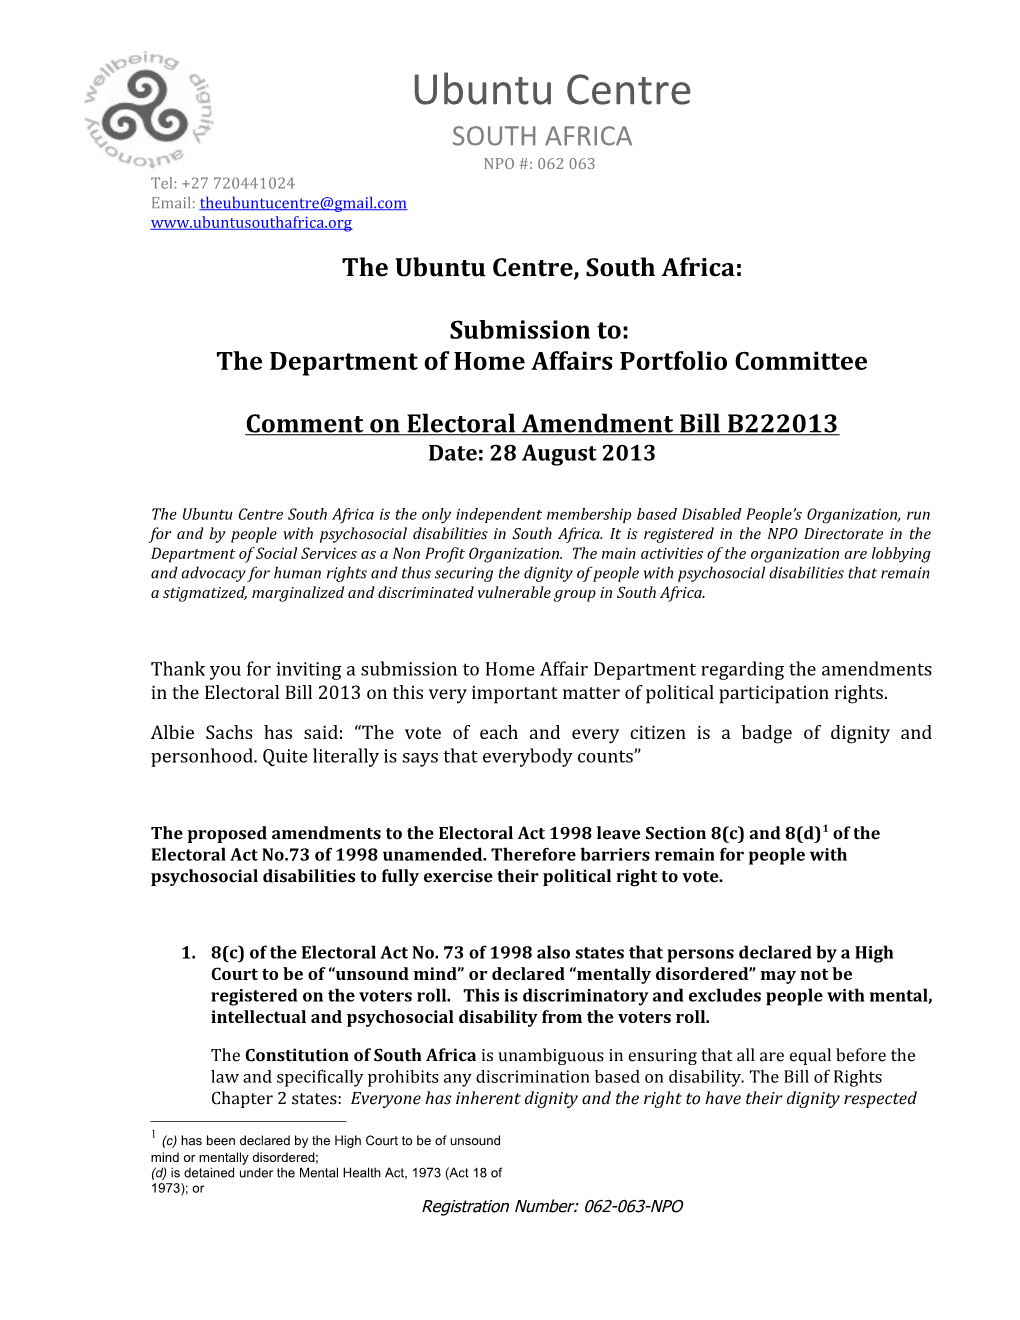 The Ubuntu Centre, South Africa Submission For